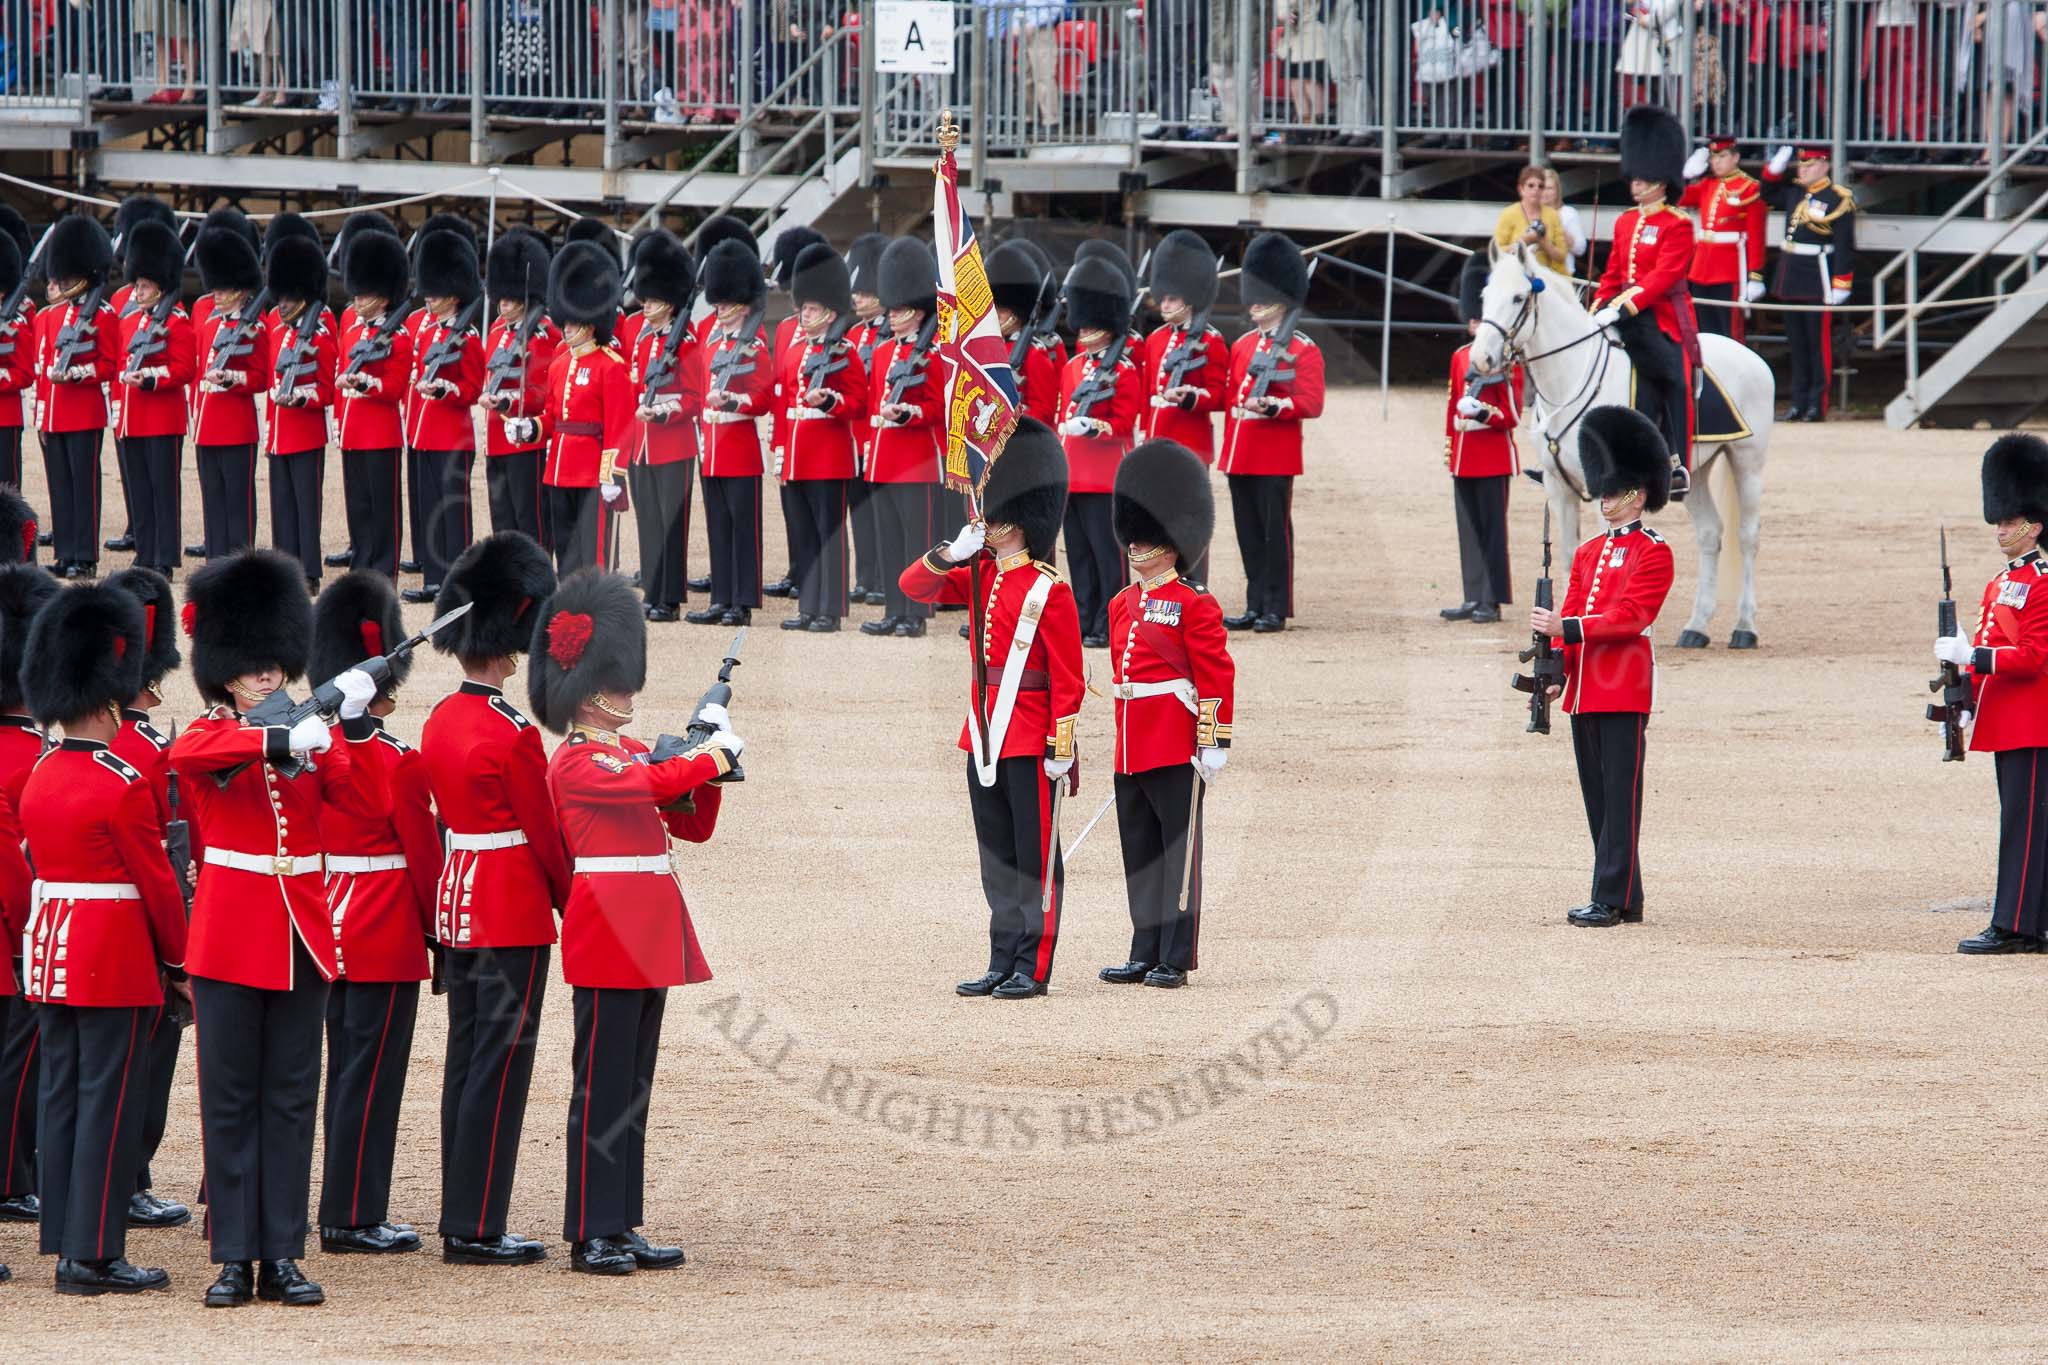 The Colonel's Review 2012: The Collection of the Colour - the Colour has been handed over..
Horse Guards Parade, Westminster,
London SW1,

United Kingdom,
on 09 June 2012 at 11:19, image #275